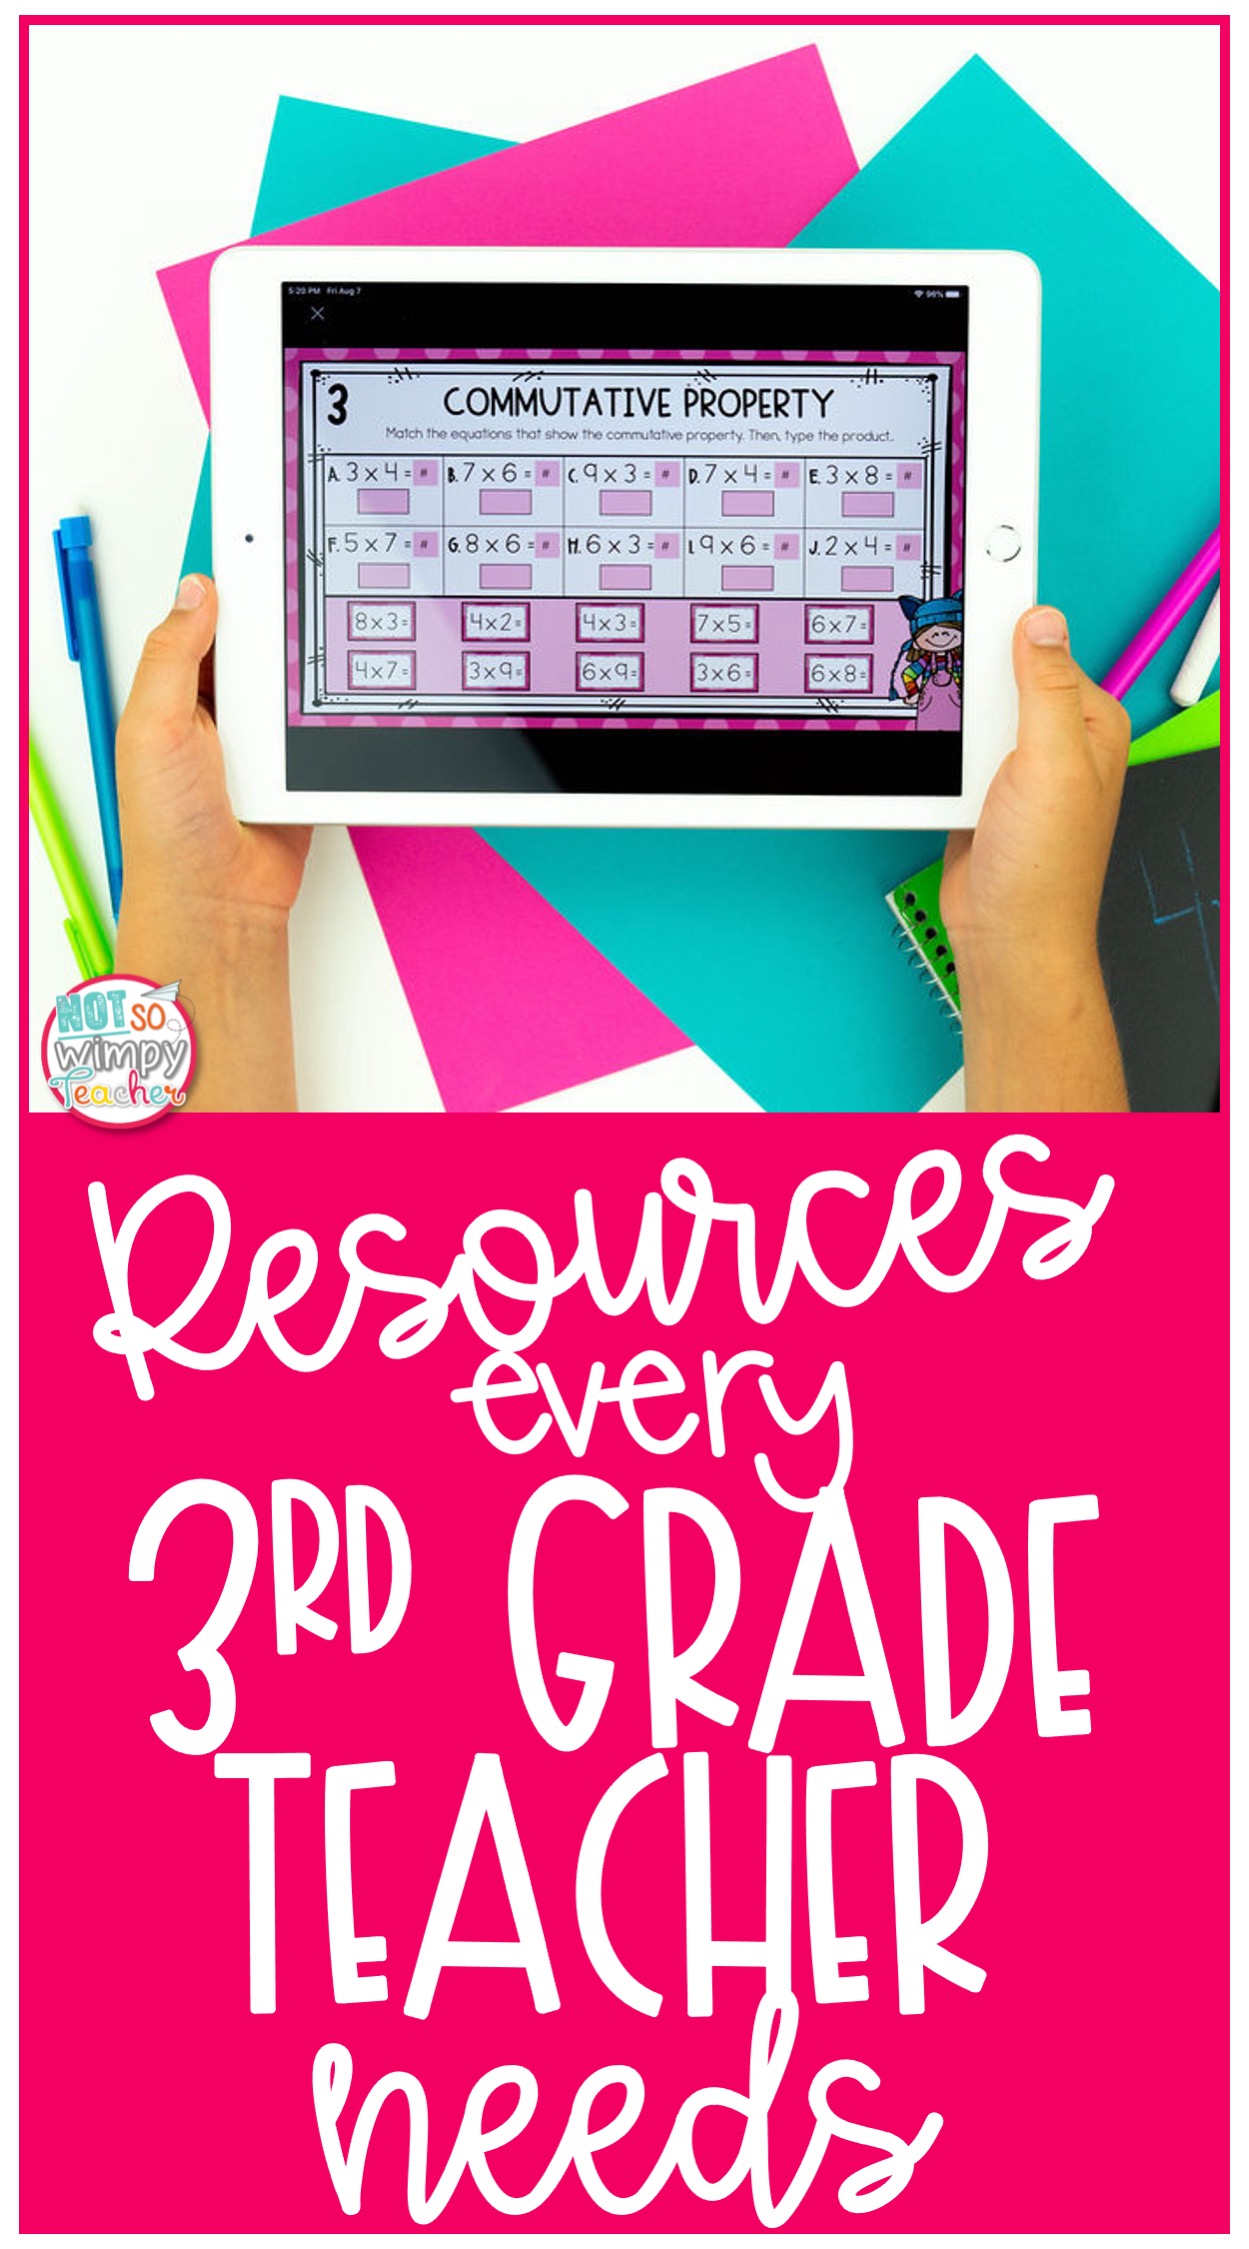 student holding ipad with digital multiplication activity with text overlay resources every 3rd grade teacher needs